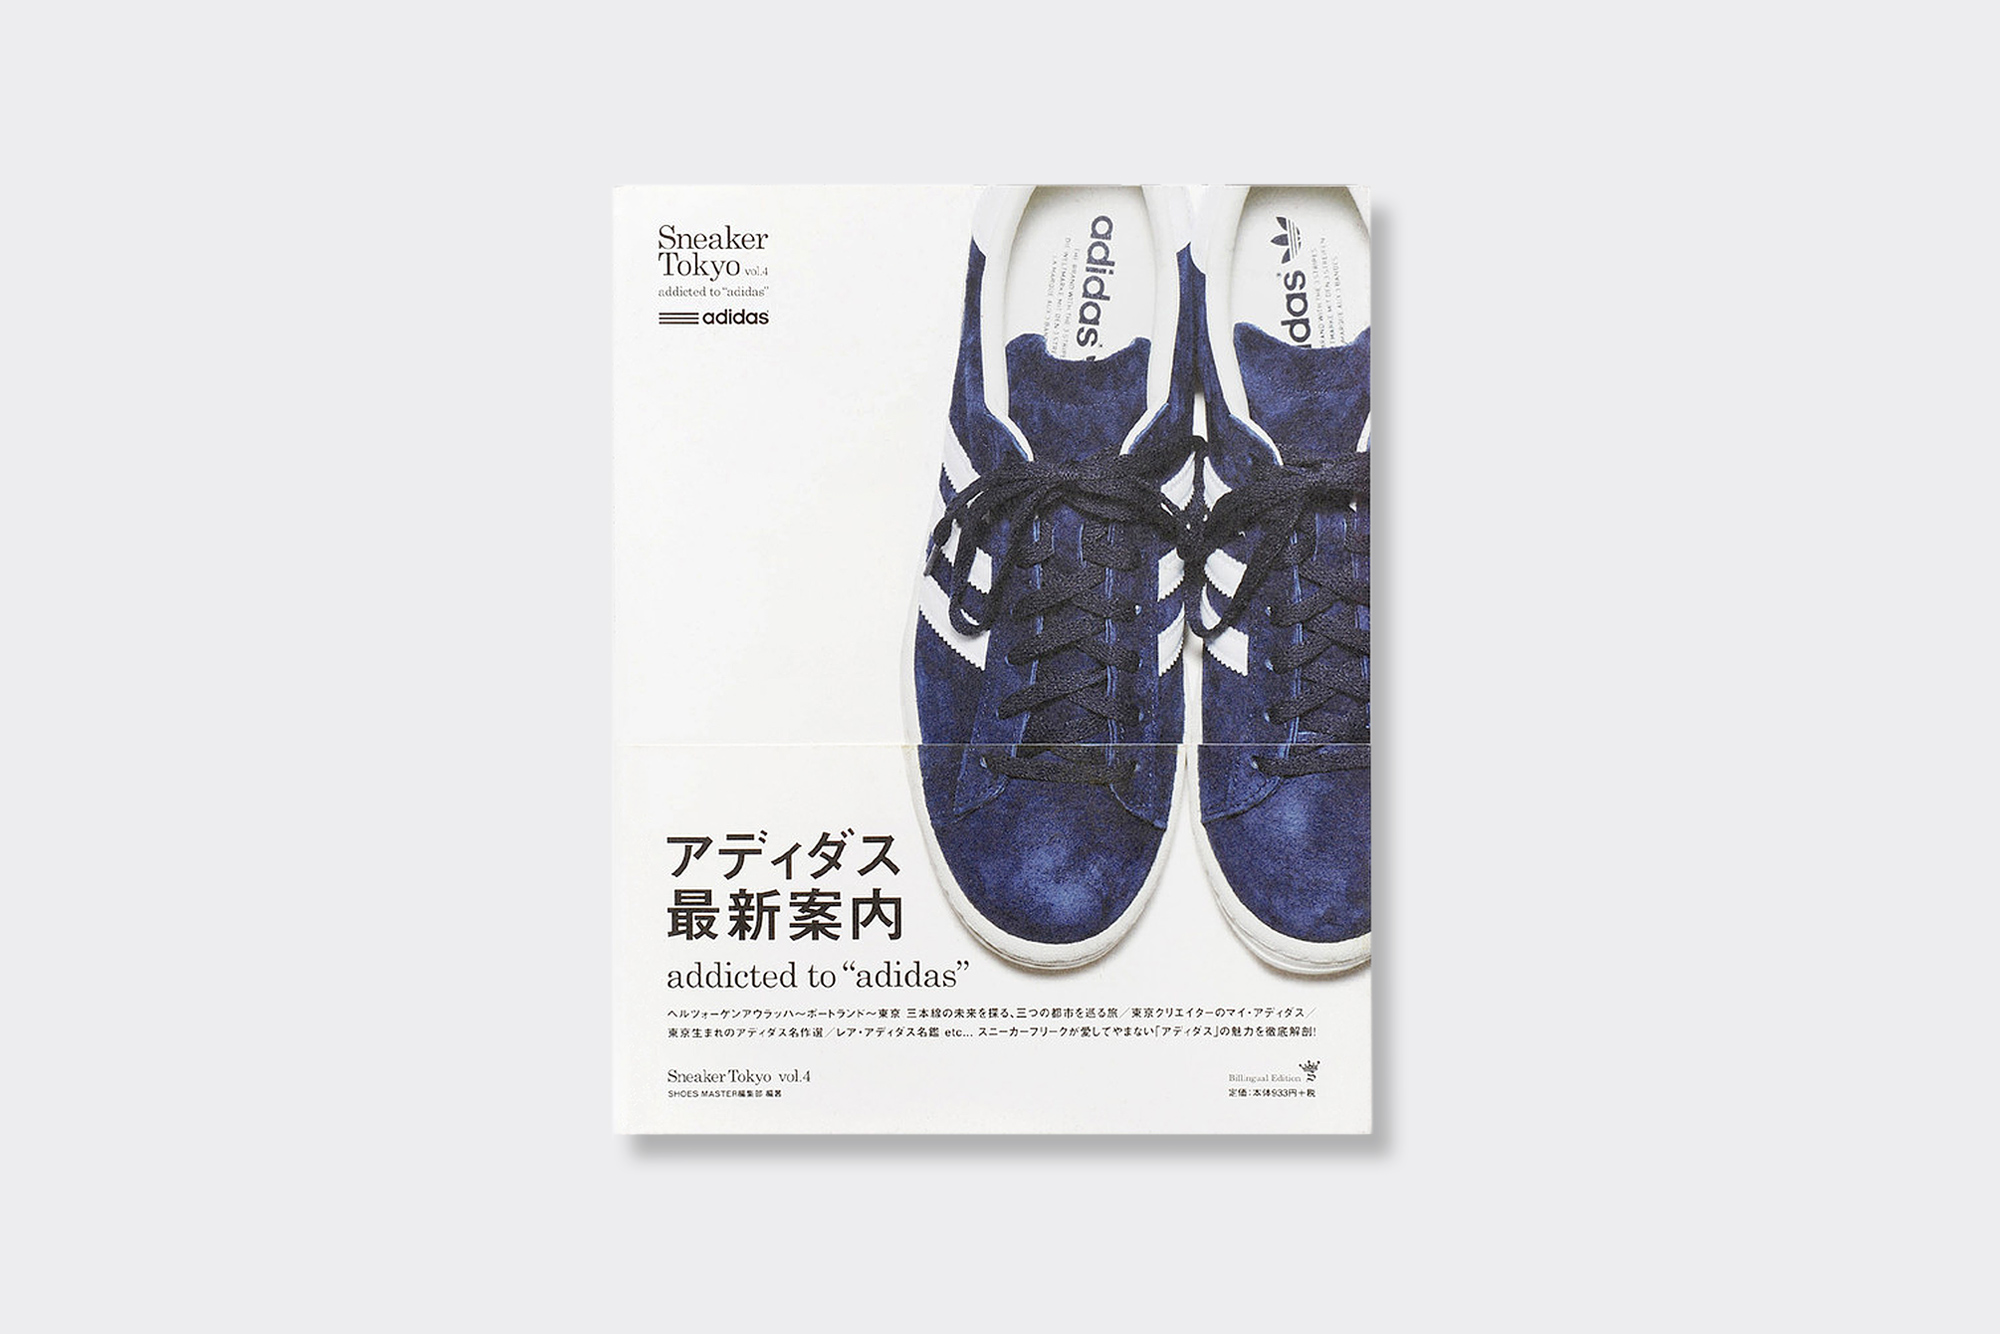 Sneaker Tokyo Vol. 4 - Addicted To Adidas (2012)